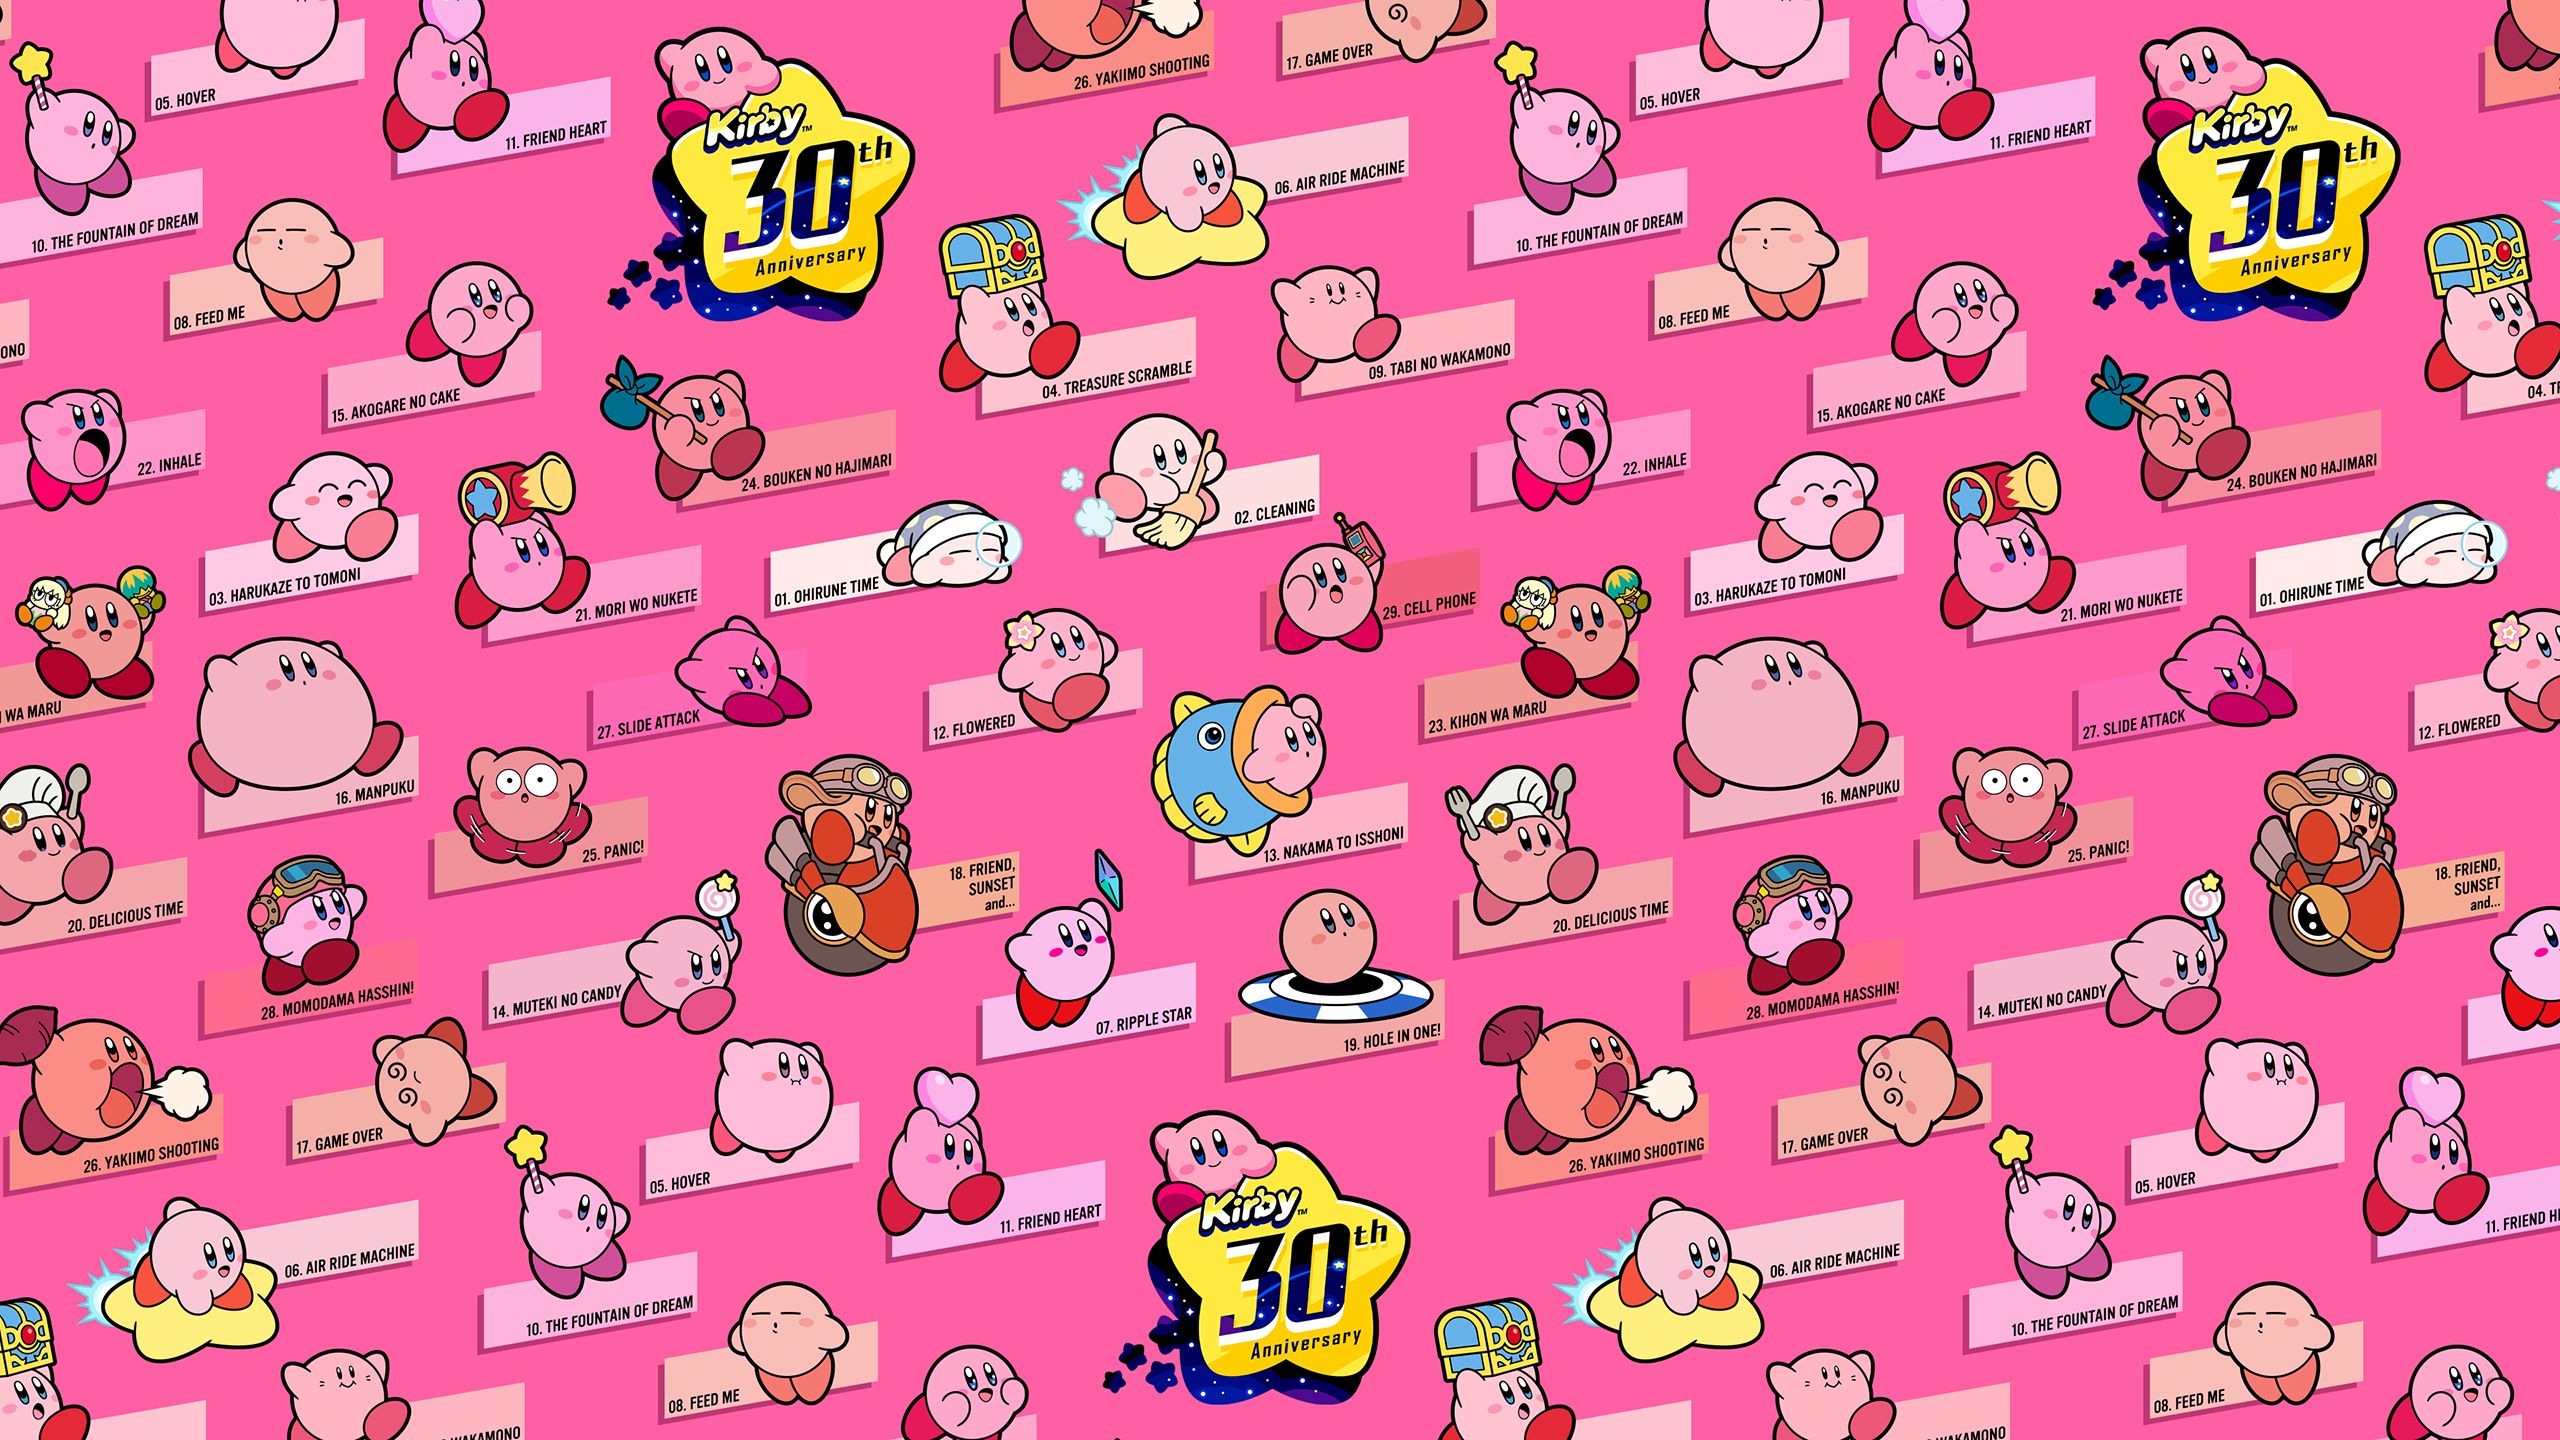 30th Anniversary Kirby Forms Wallpaper